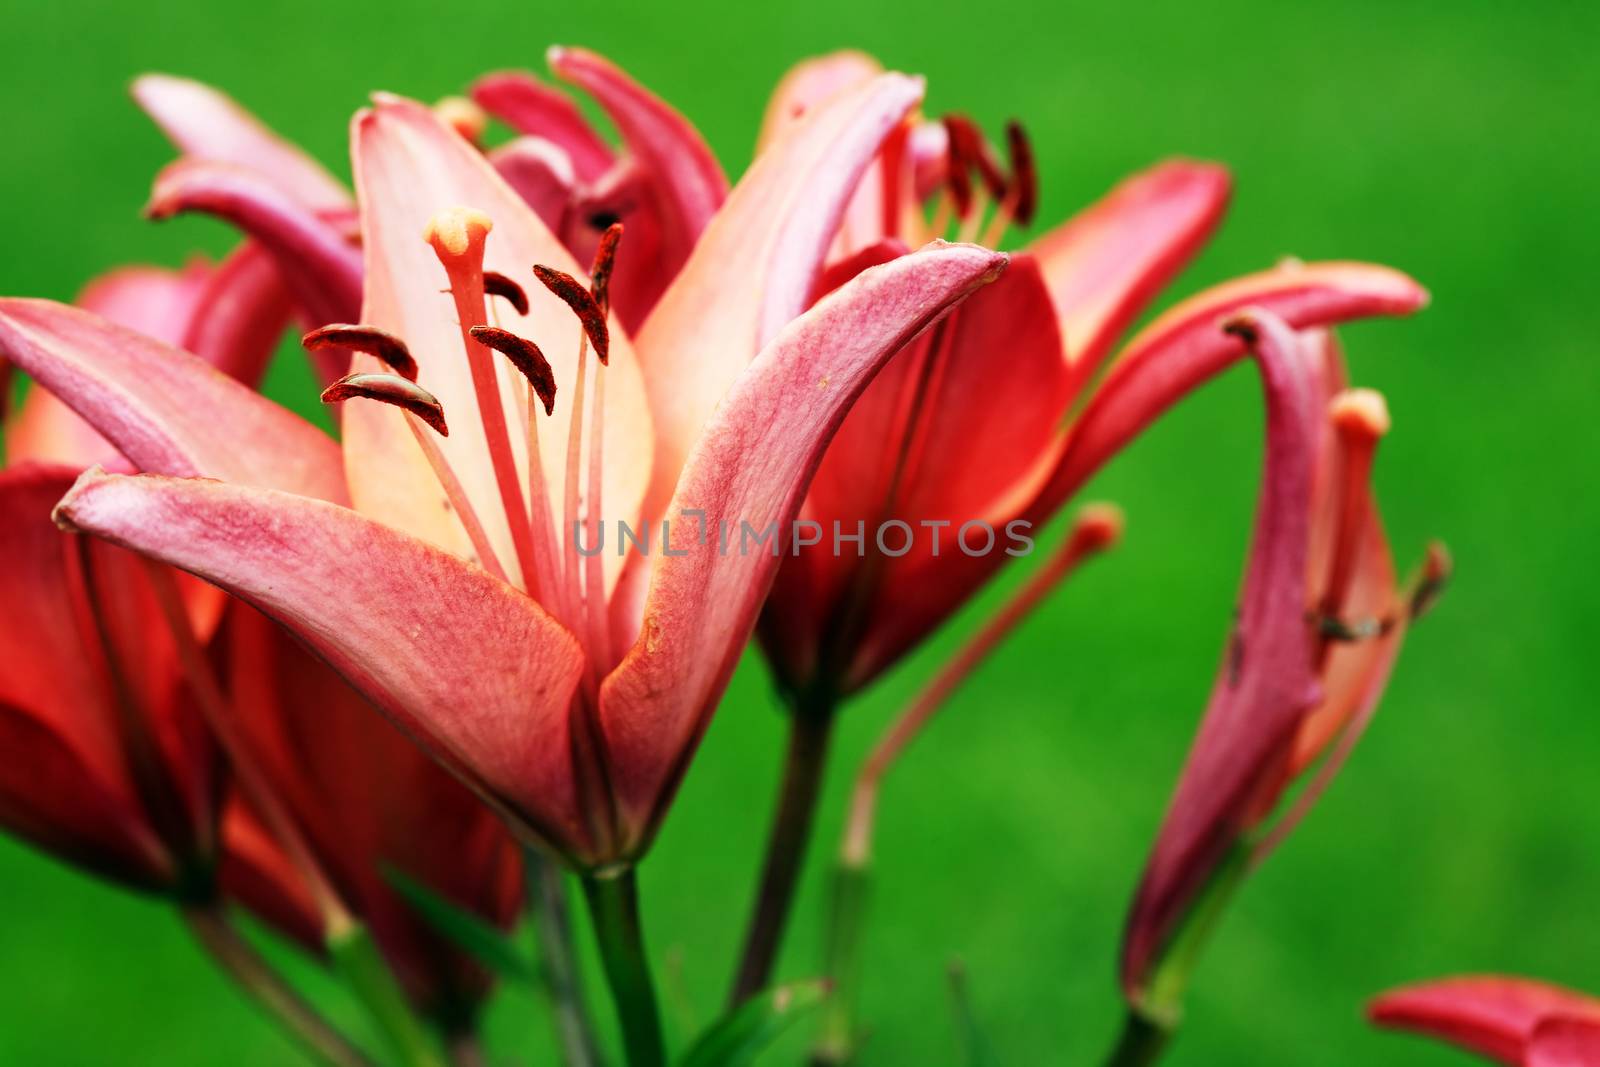 Summer gardening. Closeup of nice red lilies as background